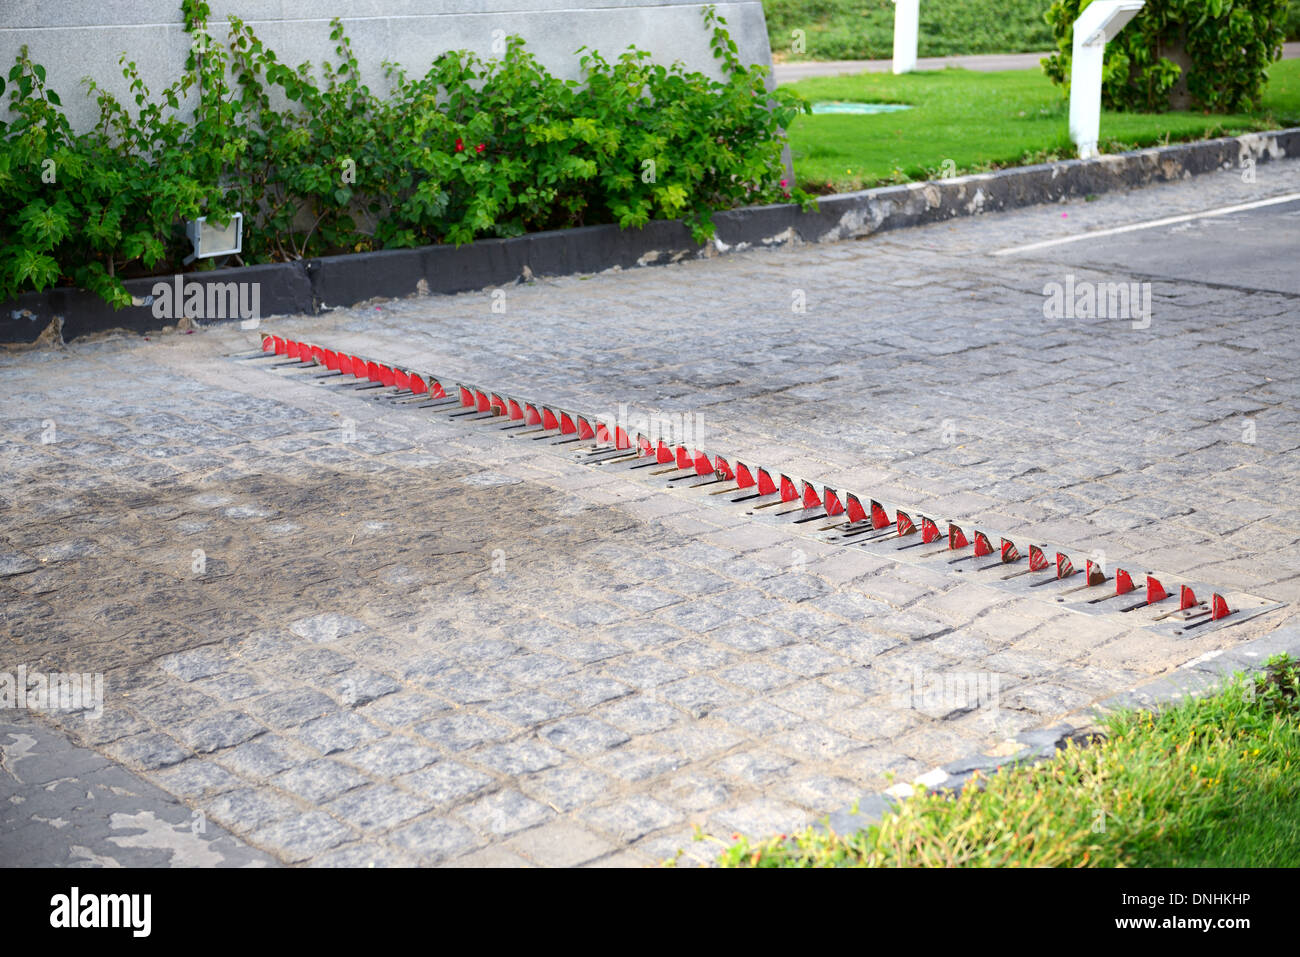 Special security pins against car's tires in the luxury hotel, Sharm el Sheikh, Egypt Stock Photo